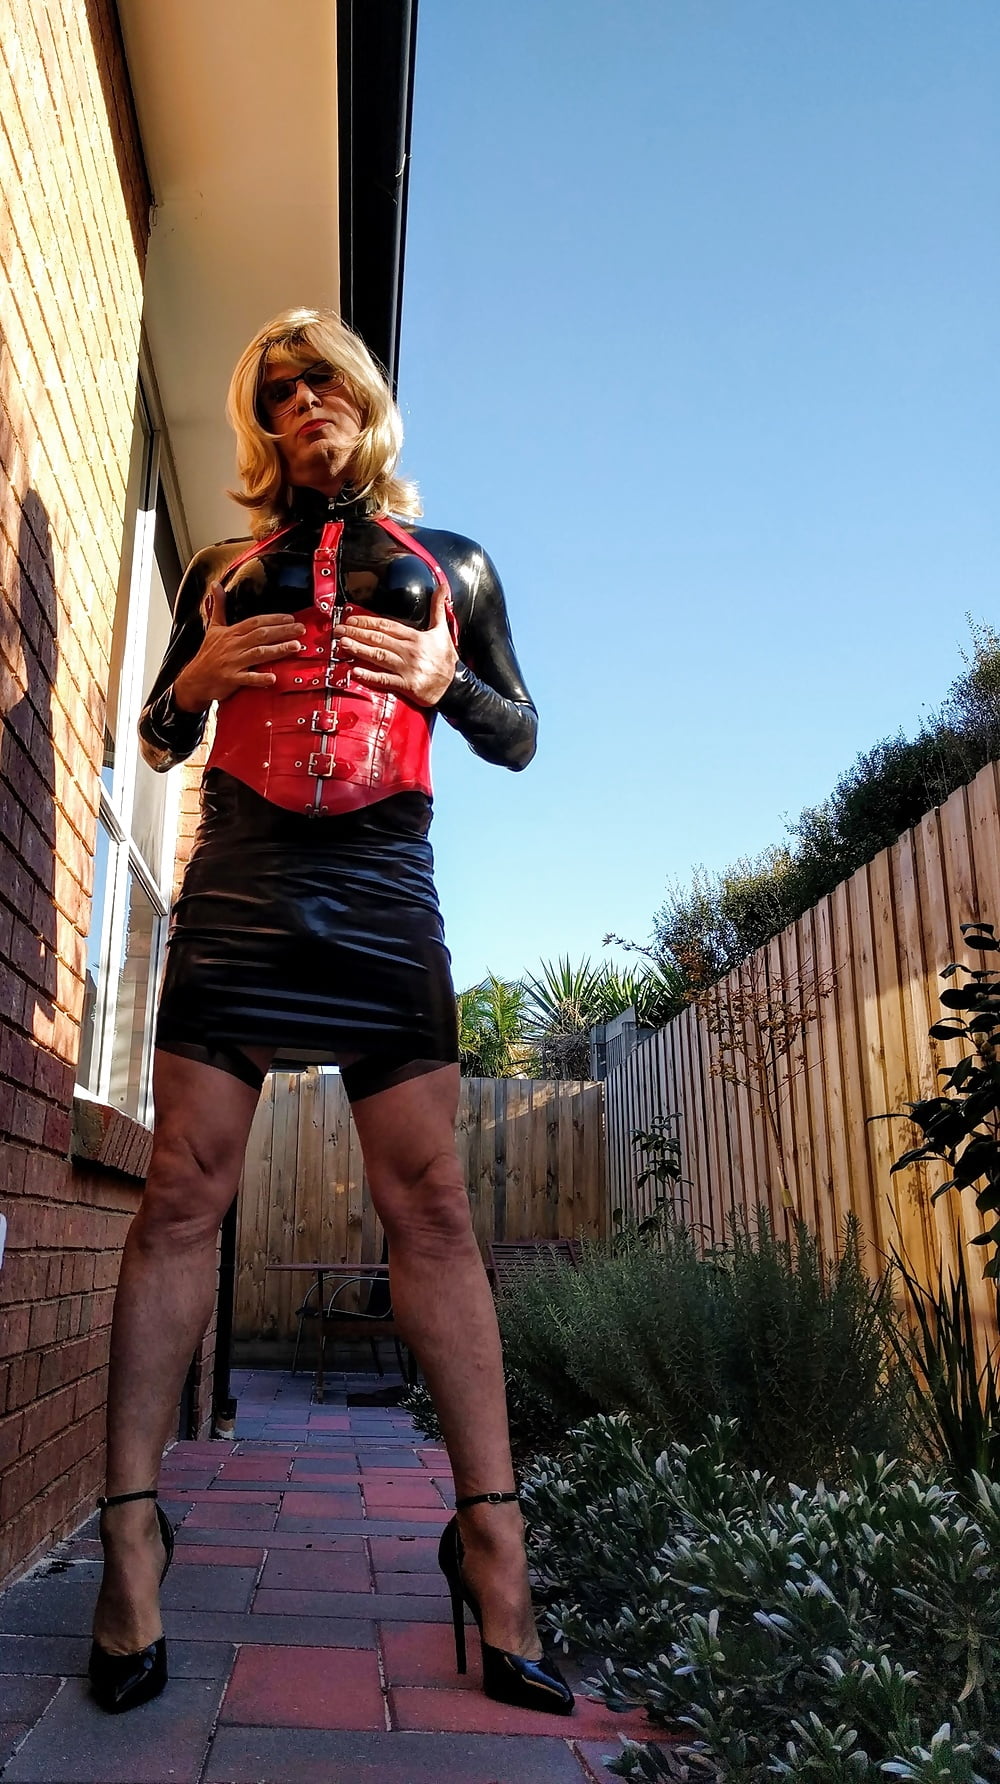 New latex skirt on a sunny Melbourne day #107021295